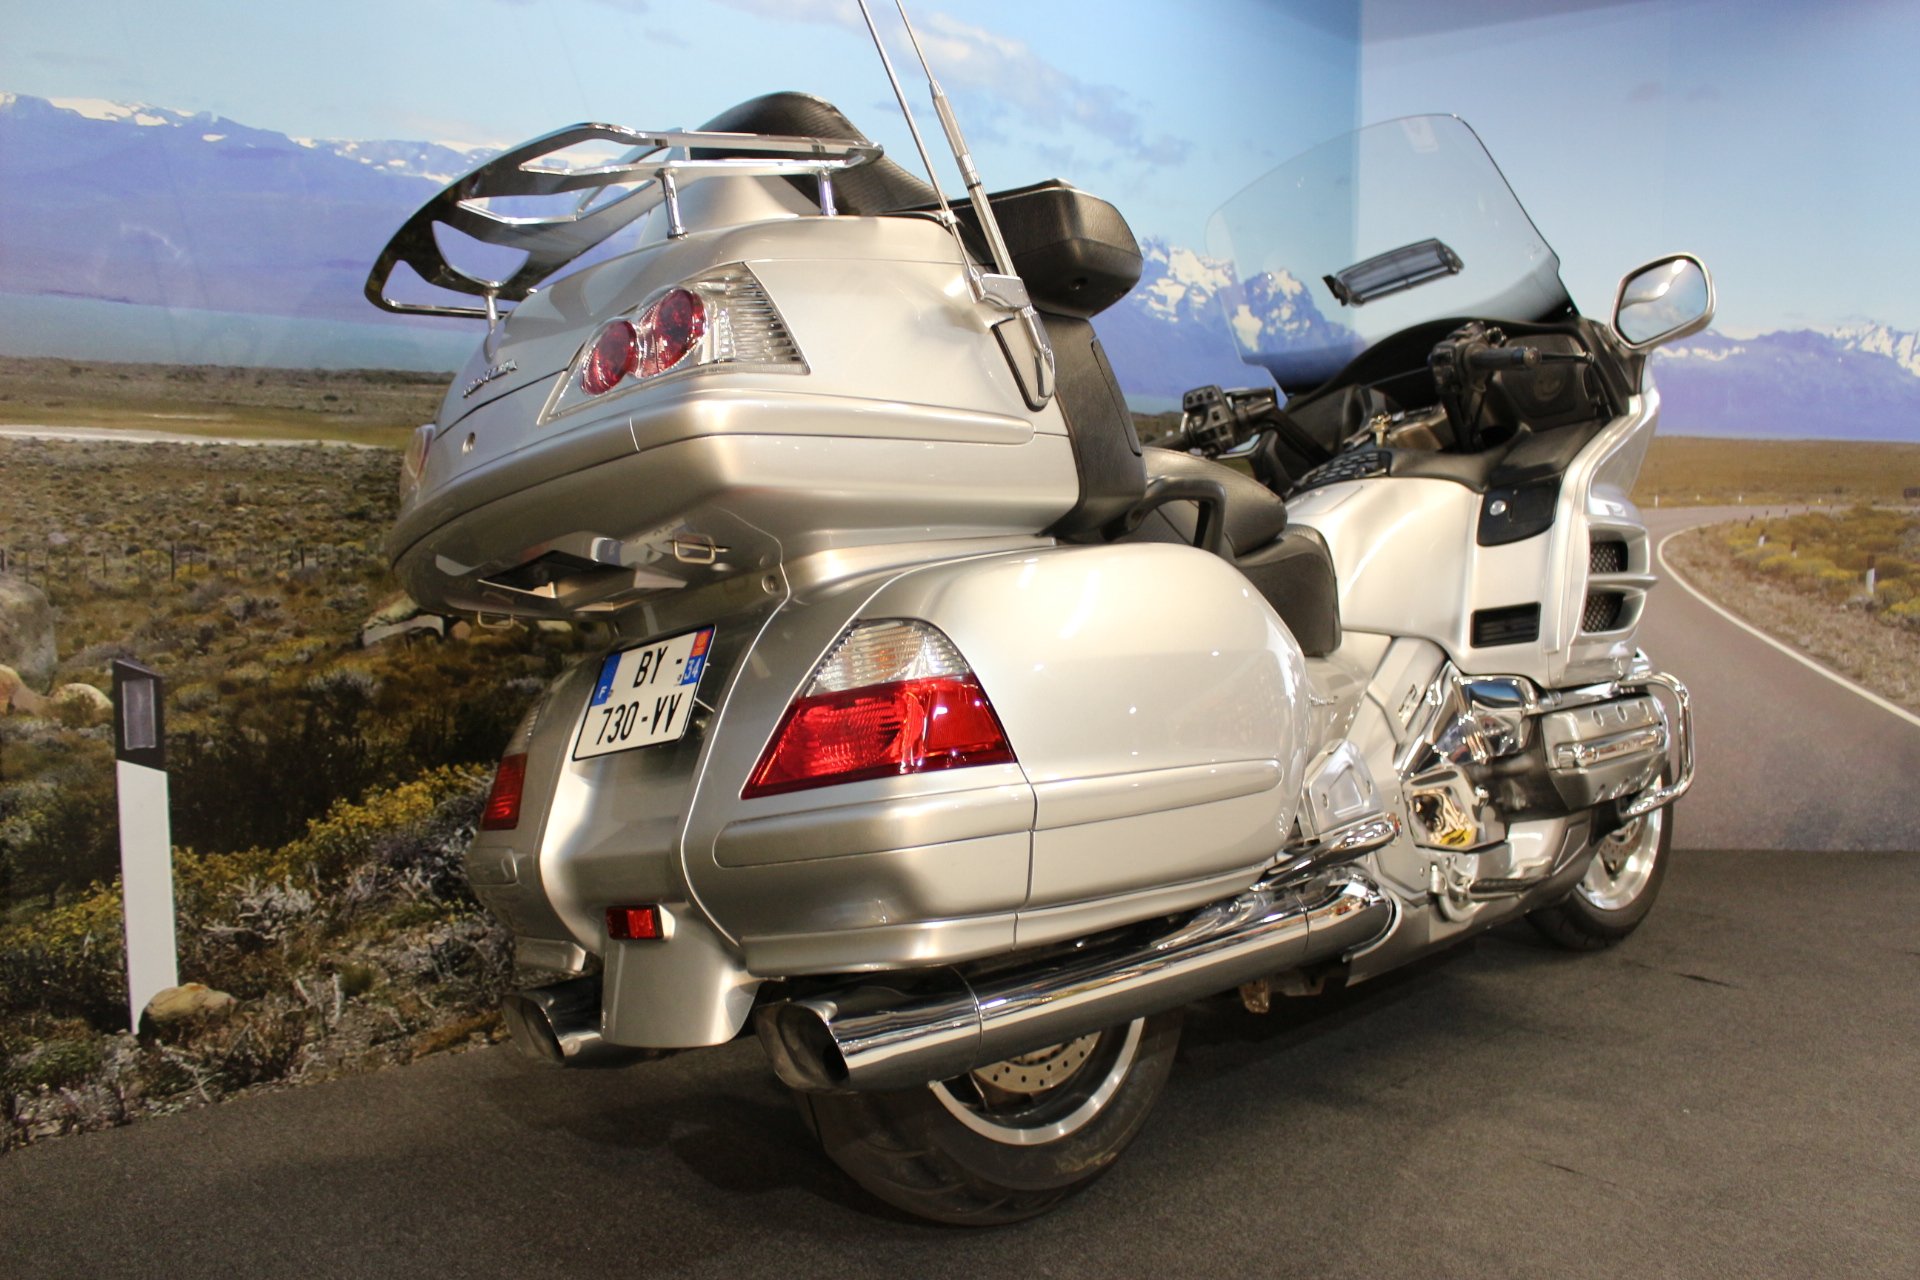 Honda gold wing 1500. Honda gl1500 Gold Wing. Honda Gold Wing 1800. Мотоцикл Honda Gold Wing gl1800. Honda gl1800 Gold Wing.